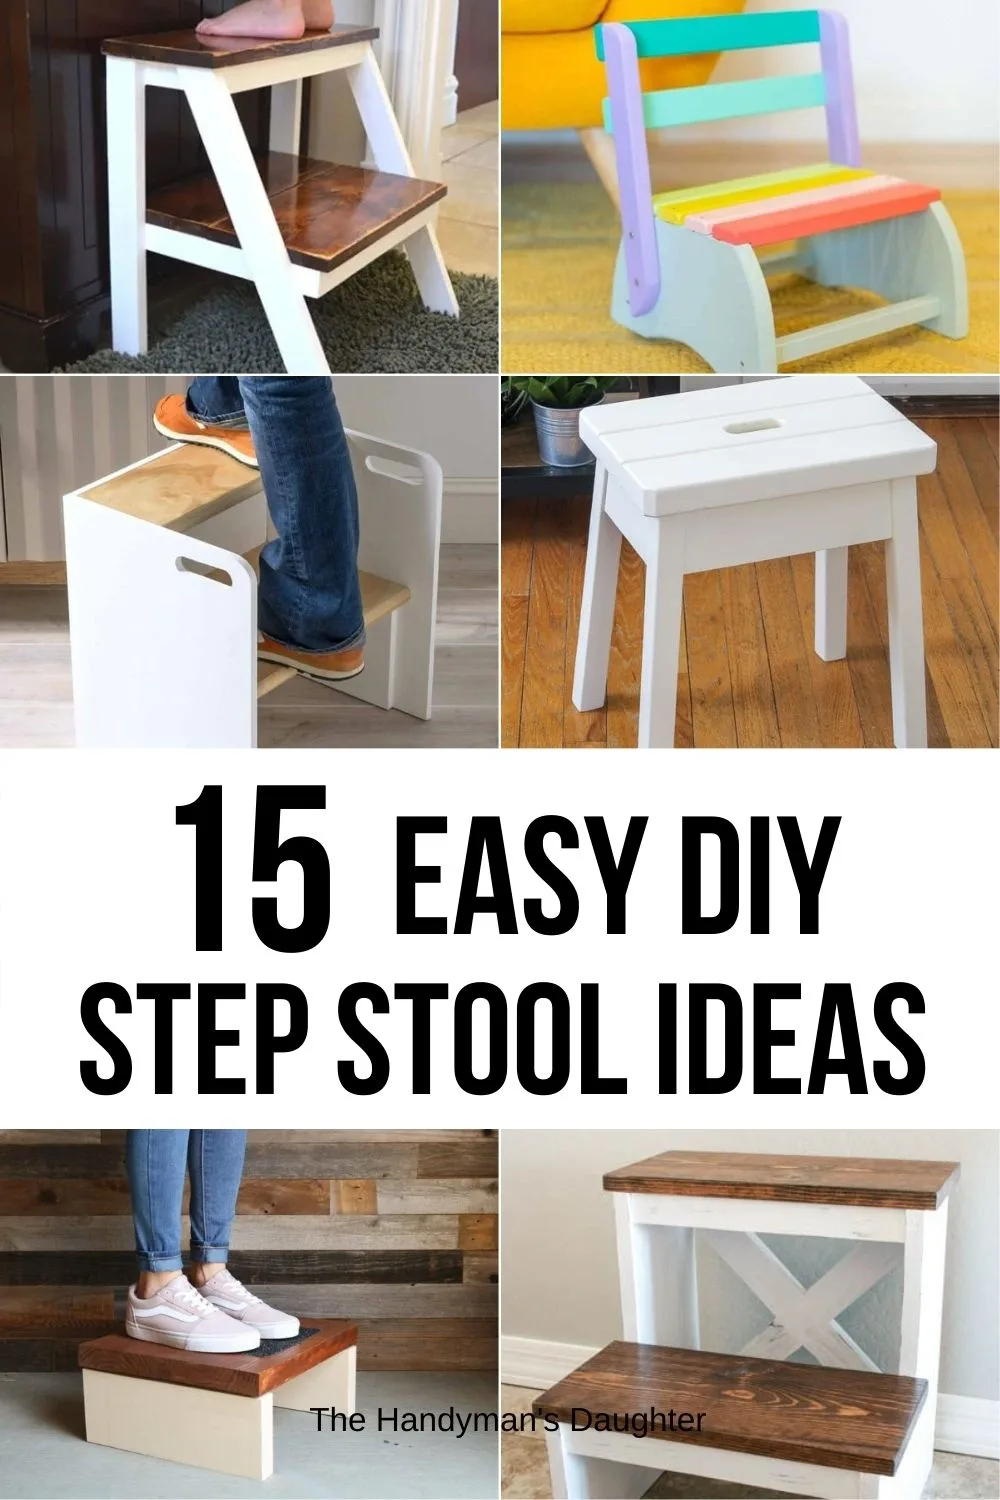 18 Easy DIY Step Stool Ideas for Kids and Adults   The Handyman's ...